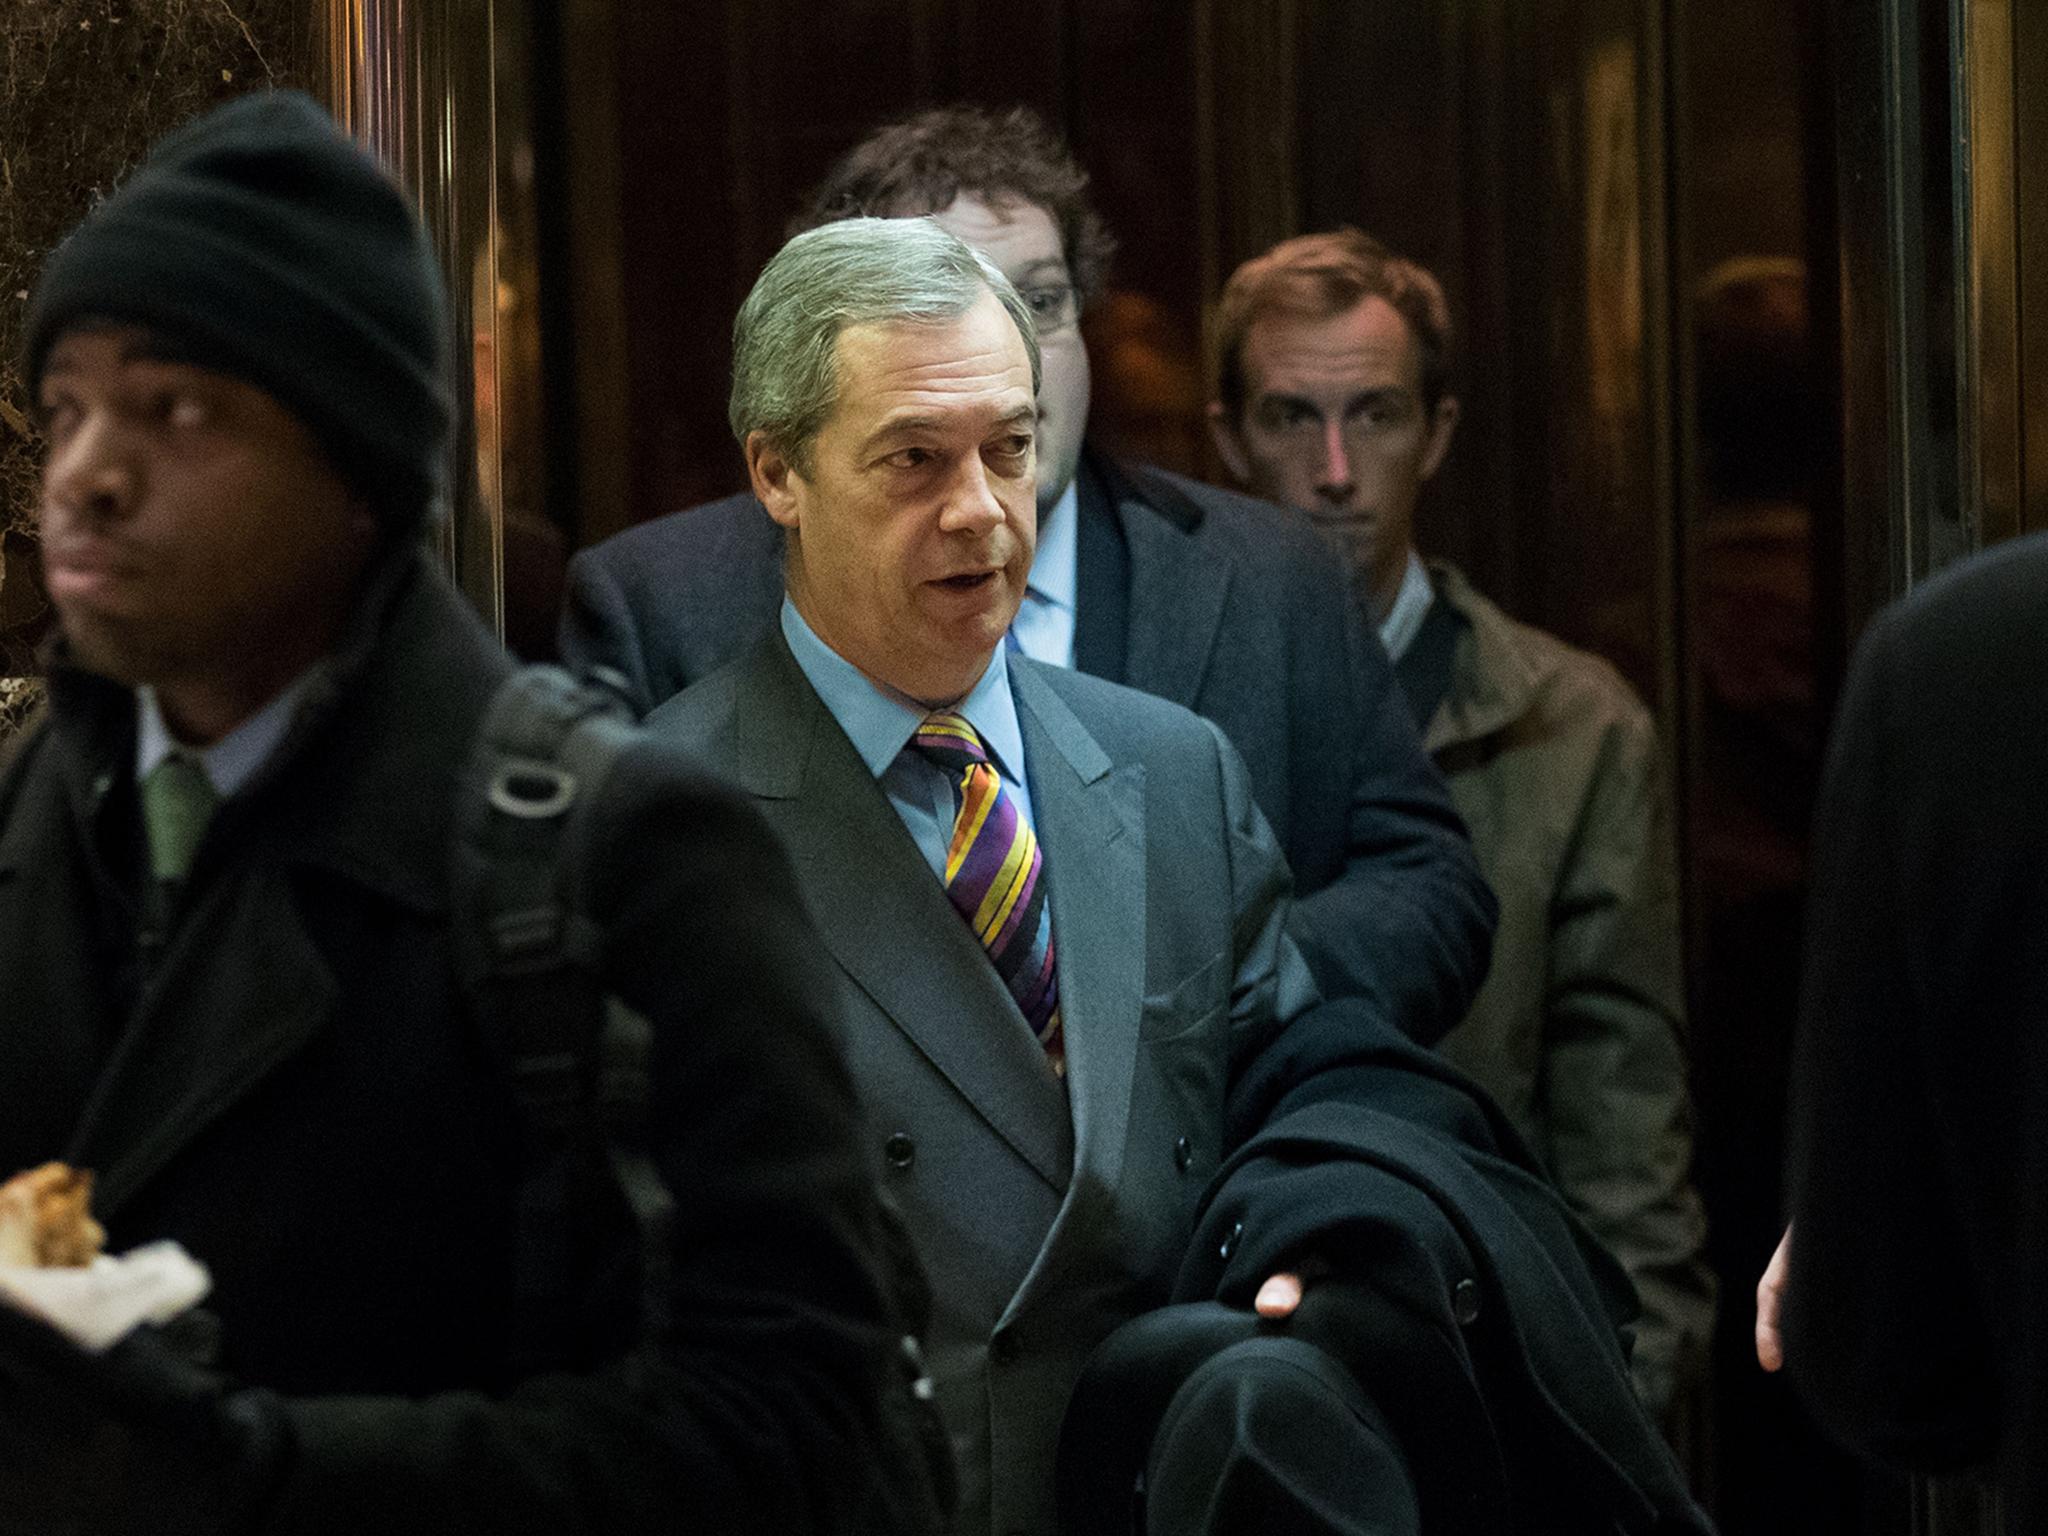 Mr Farage leaving Trump Tower after a meeting with the President-elect last month